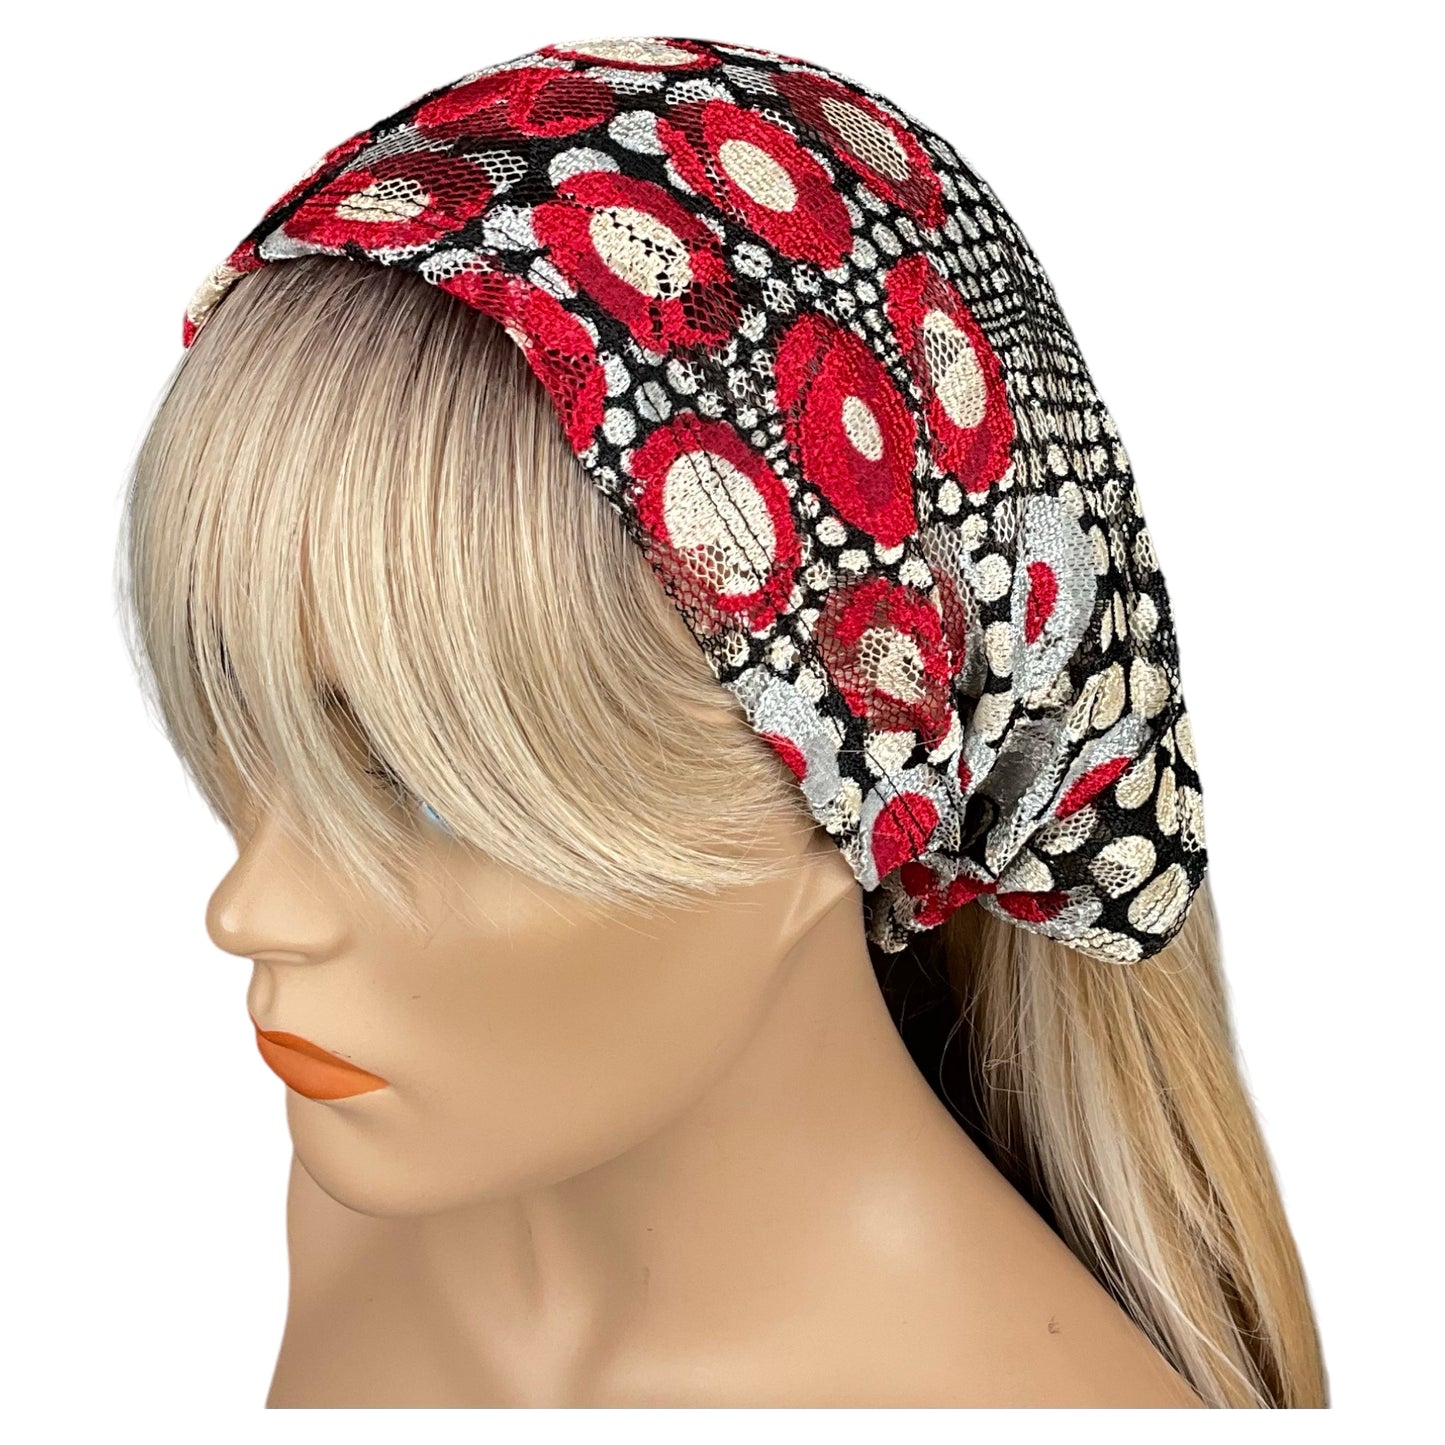 Red, Black and Cream Circle Print Lace Wide Headband